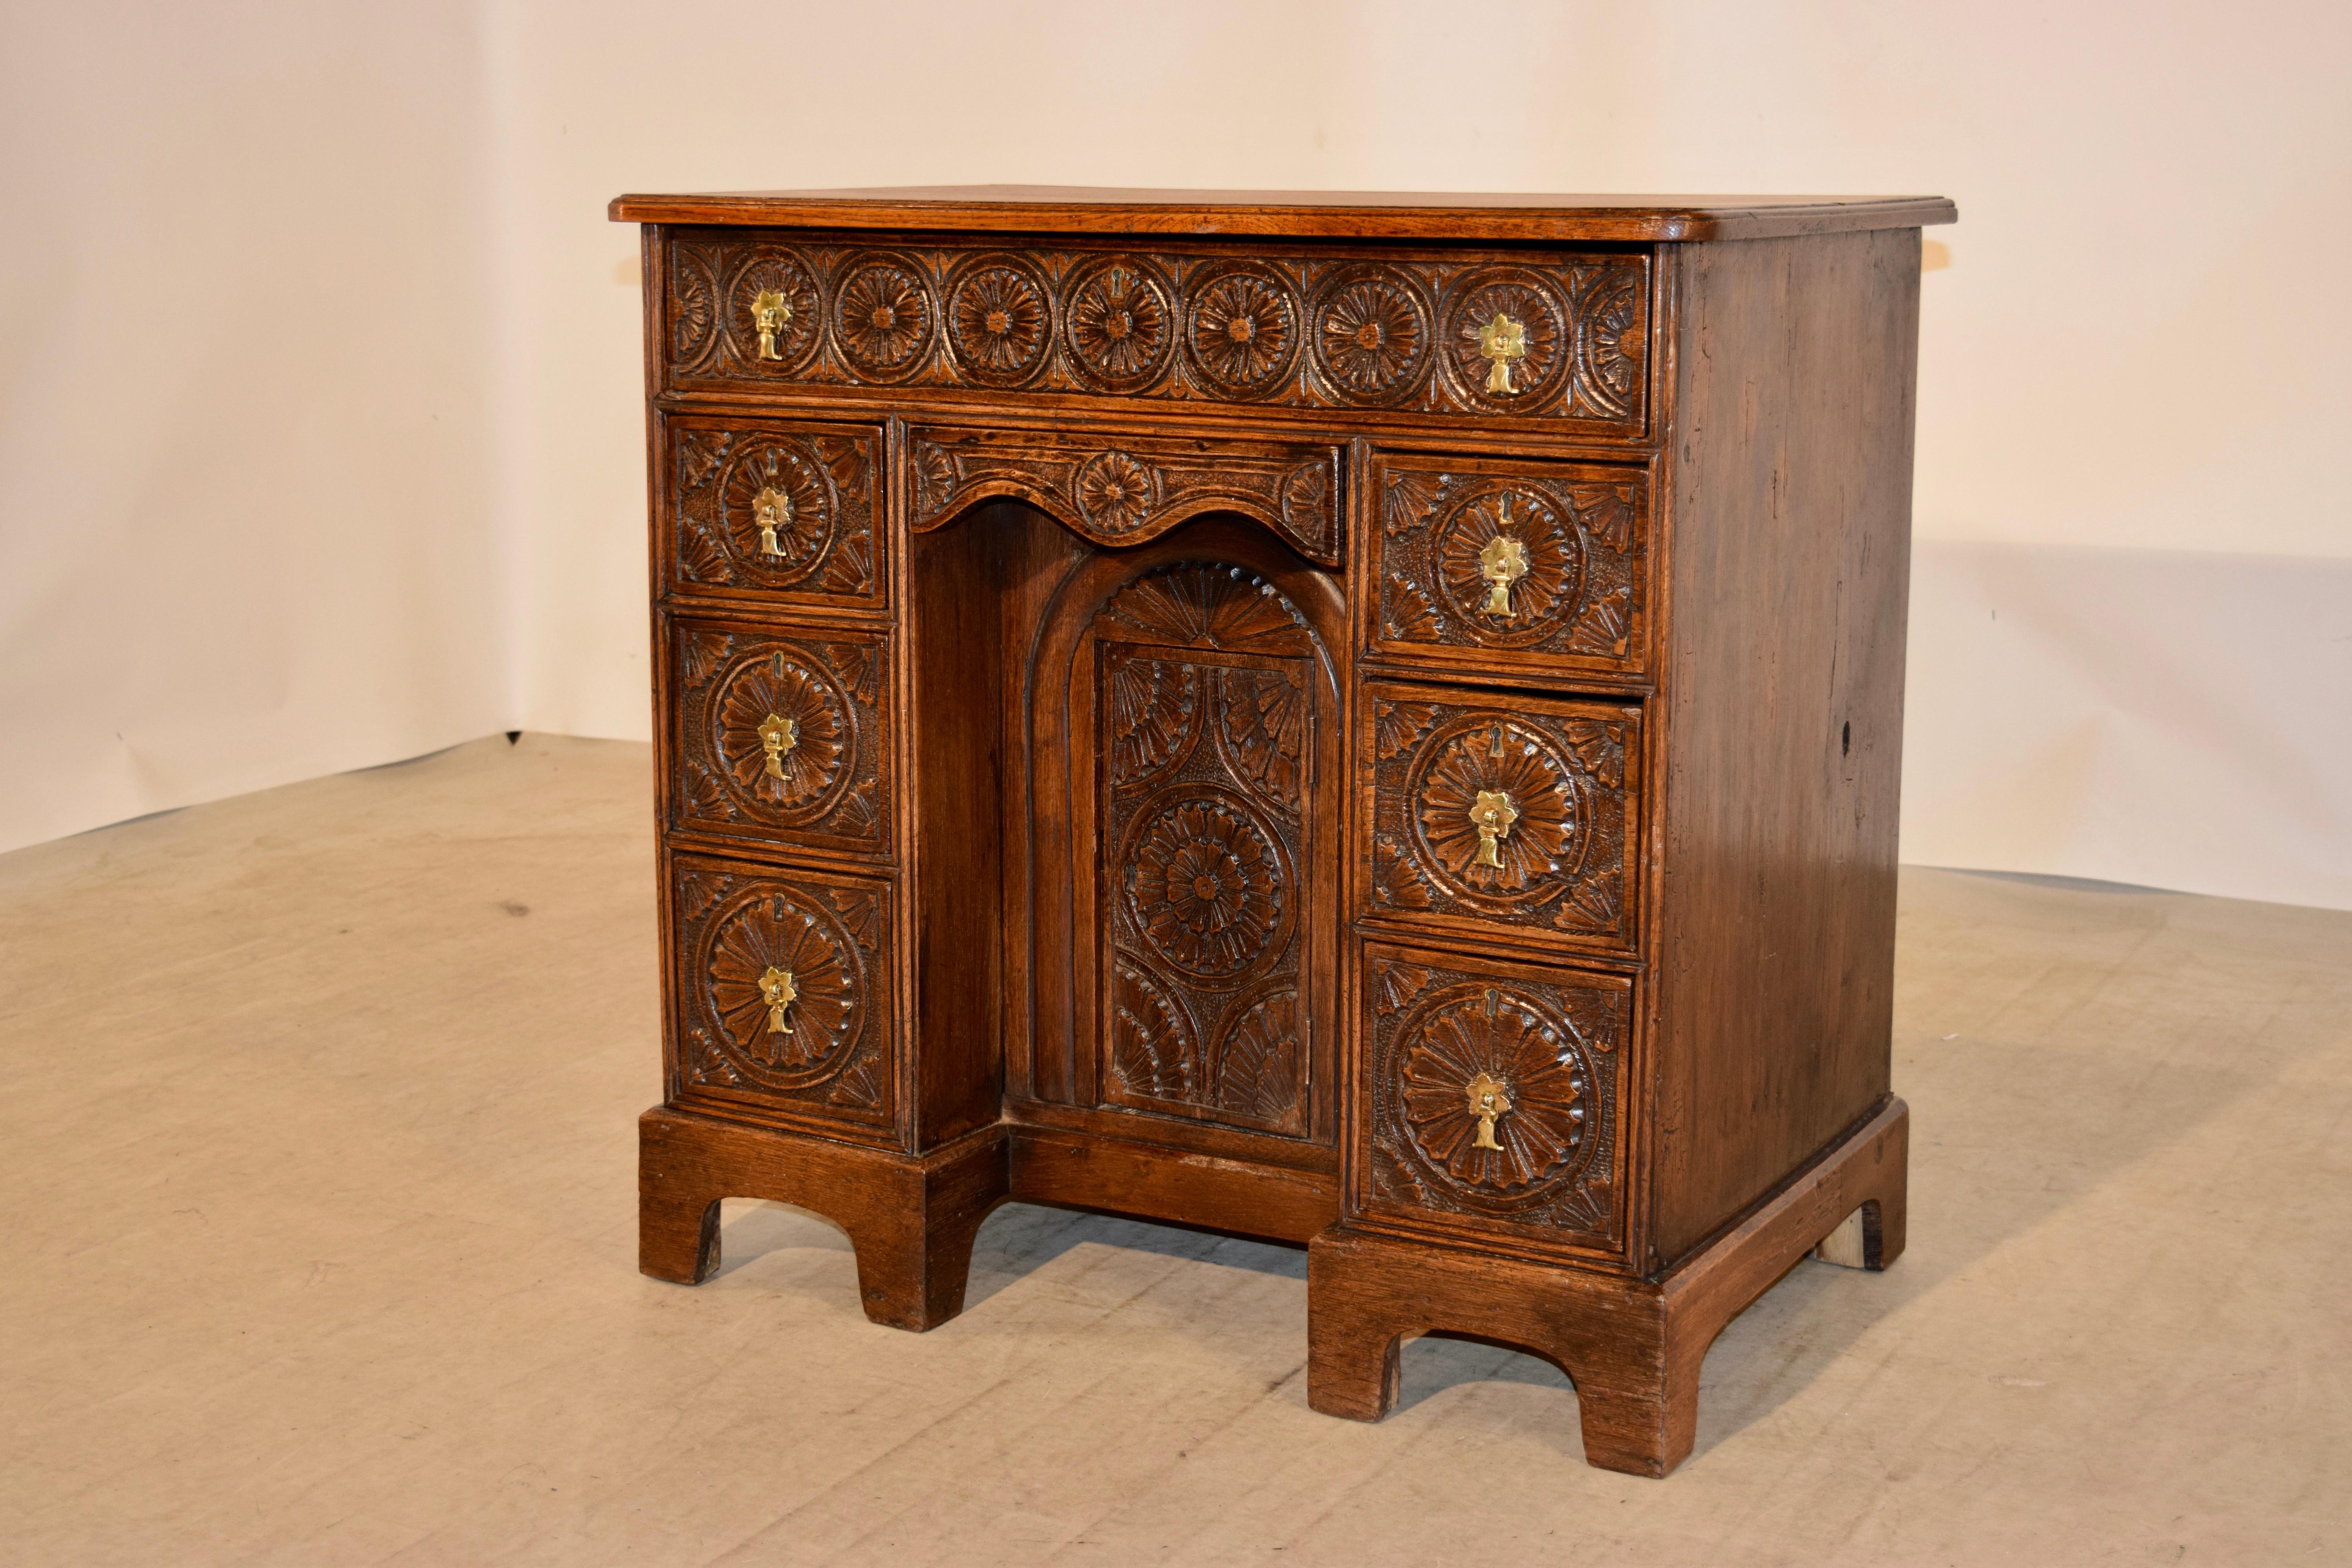 19th century English knee hole desk made from oak with a beveled edge around the top following down to a single drawer over two banks of three drawers each flanking a central door which opens to reveal storage. All of the drawer fronts and door are